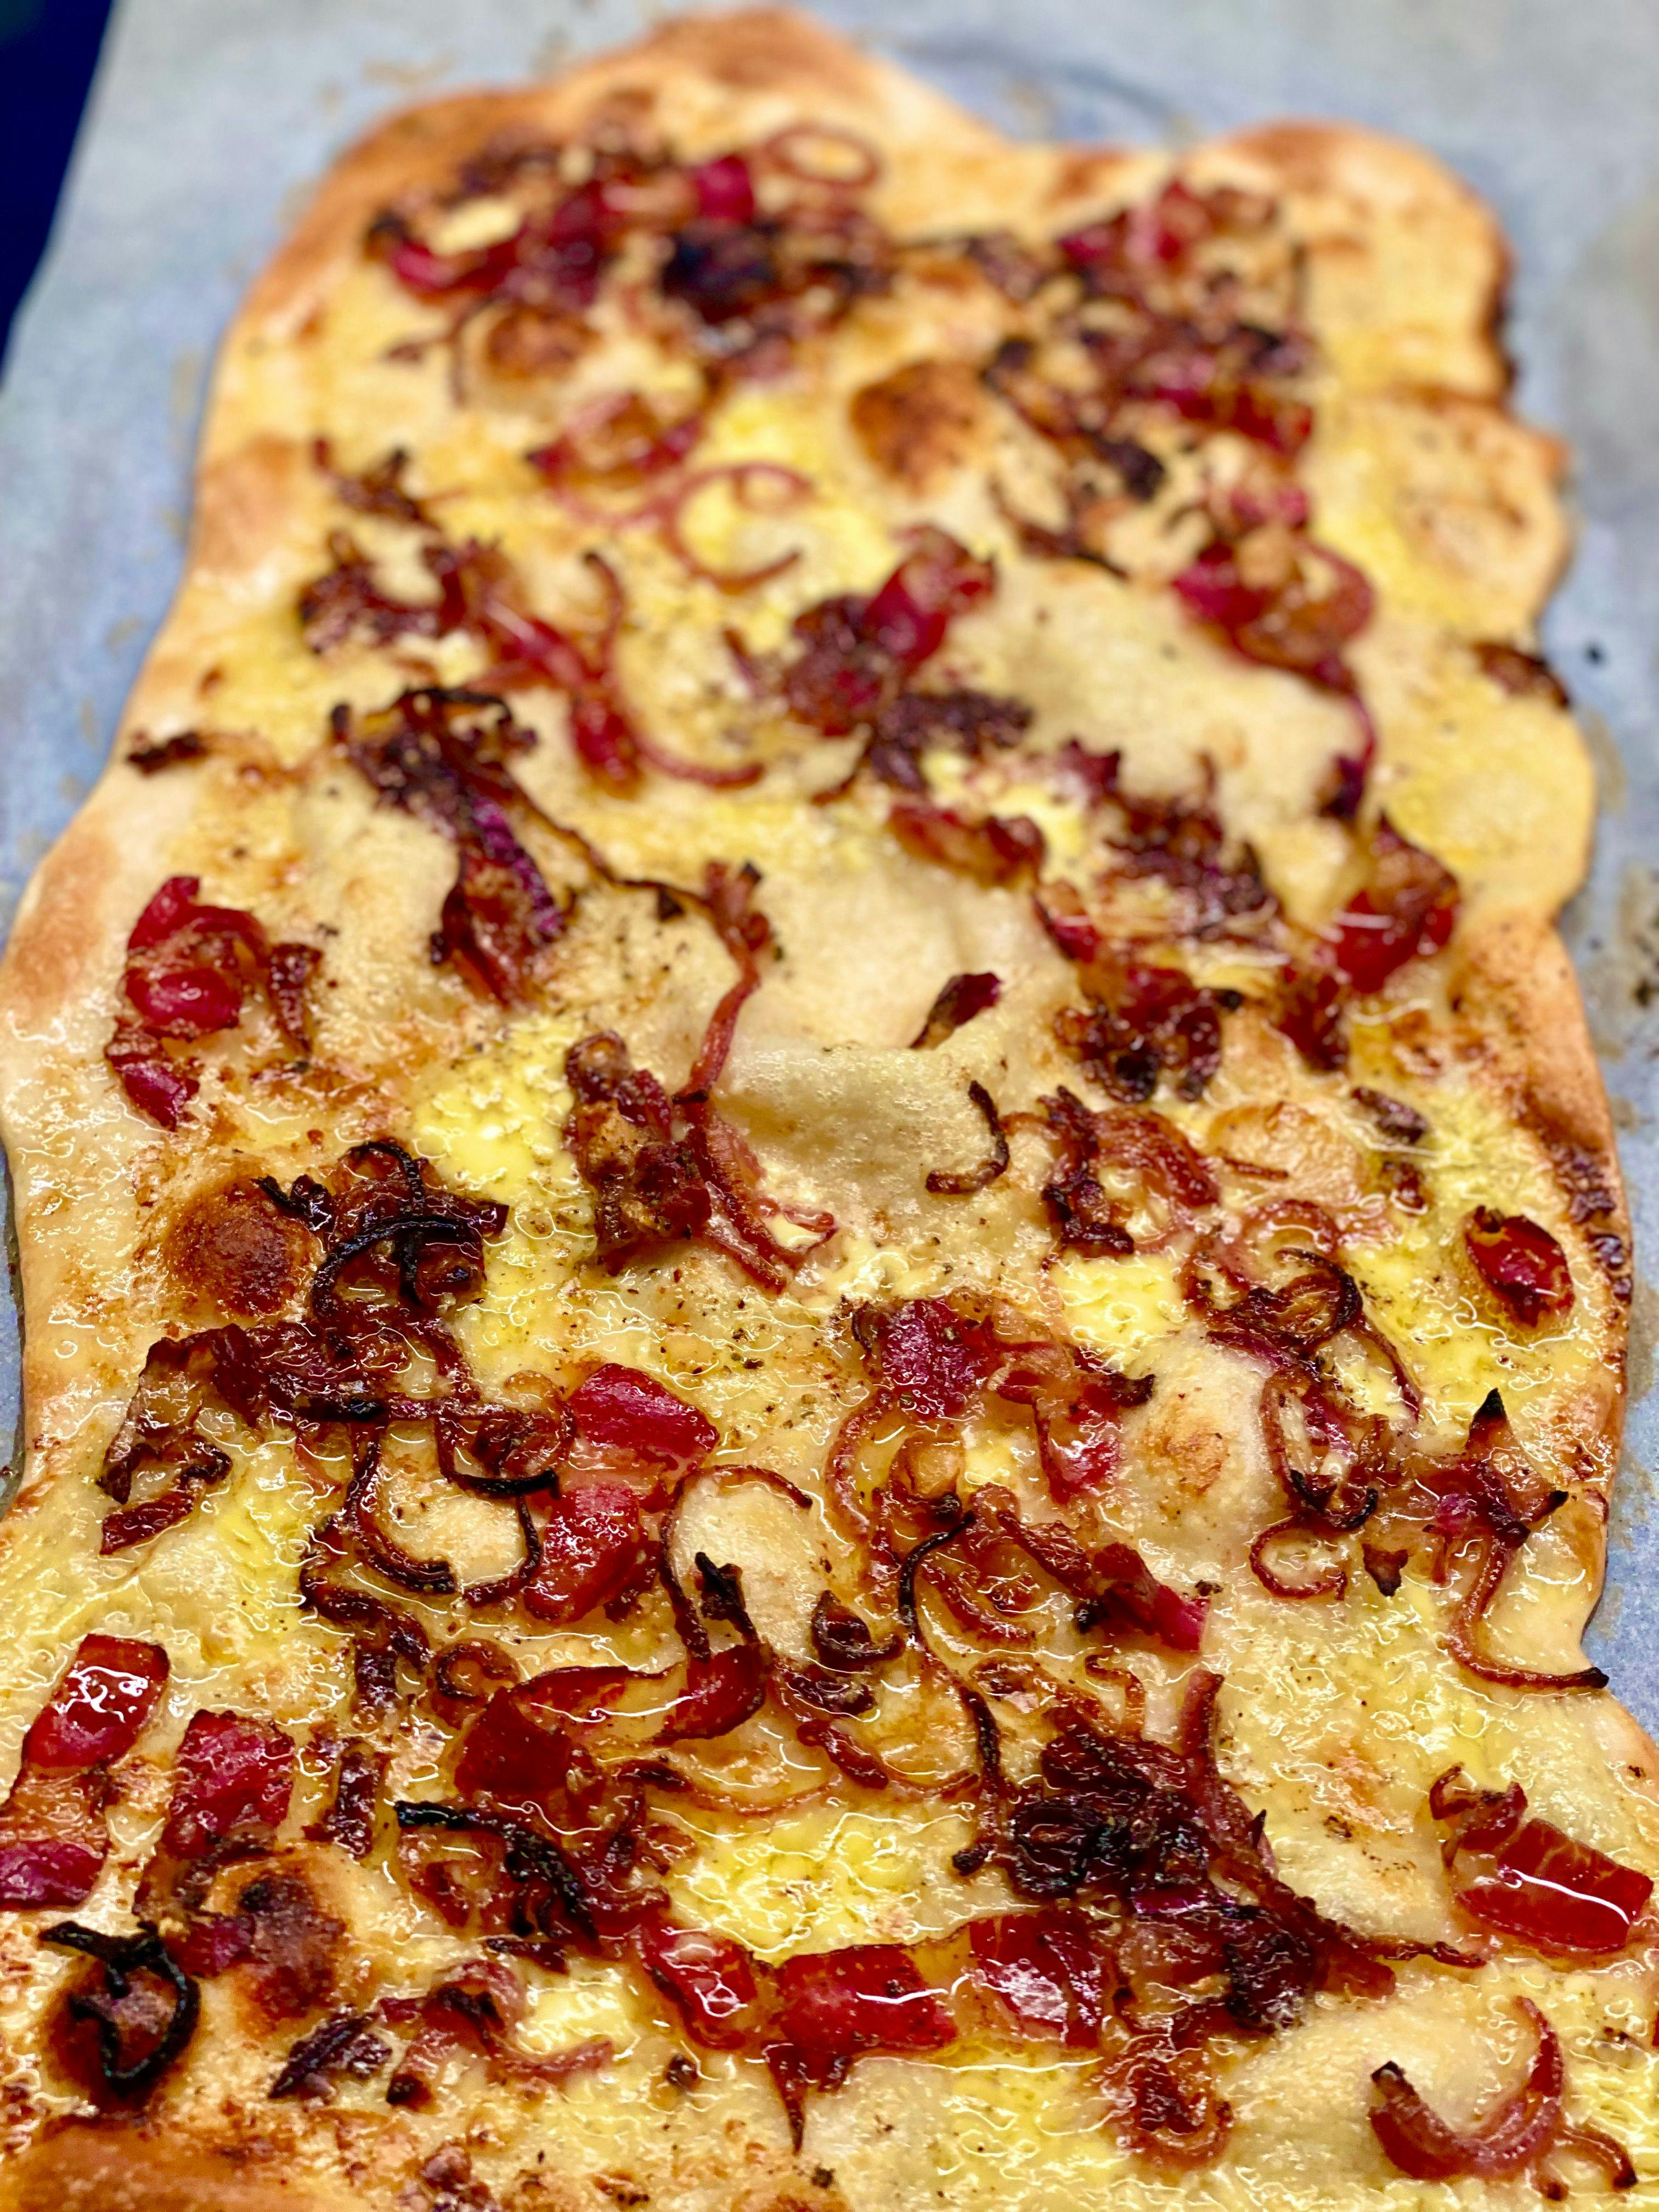 crispy golden pastry with bacon and fried onions